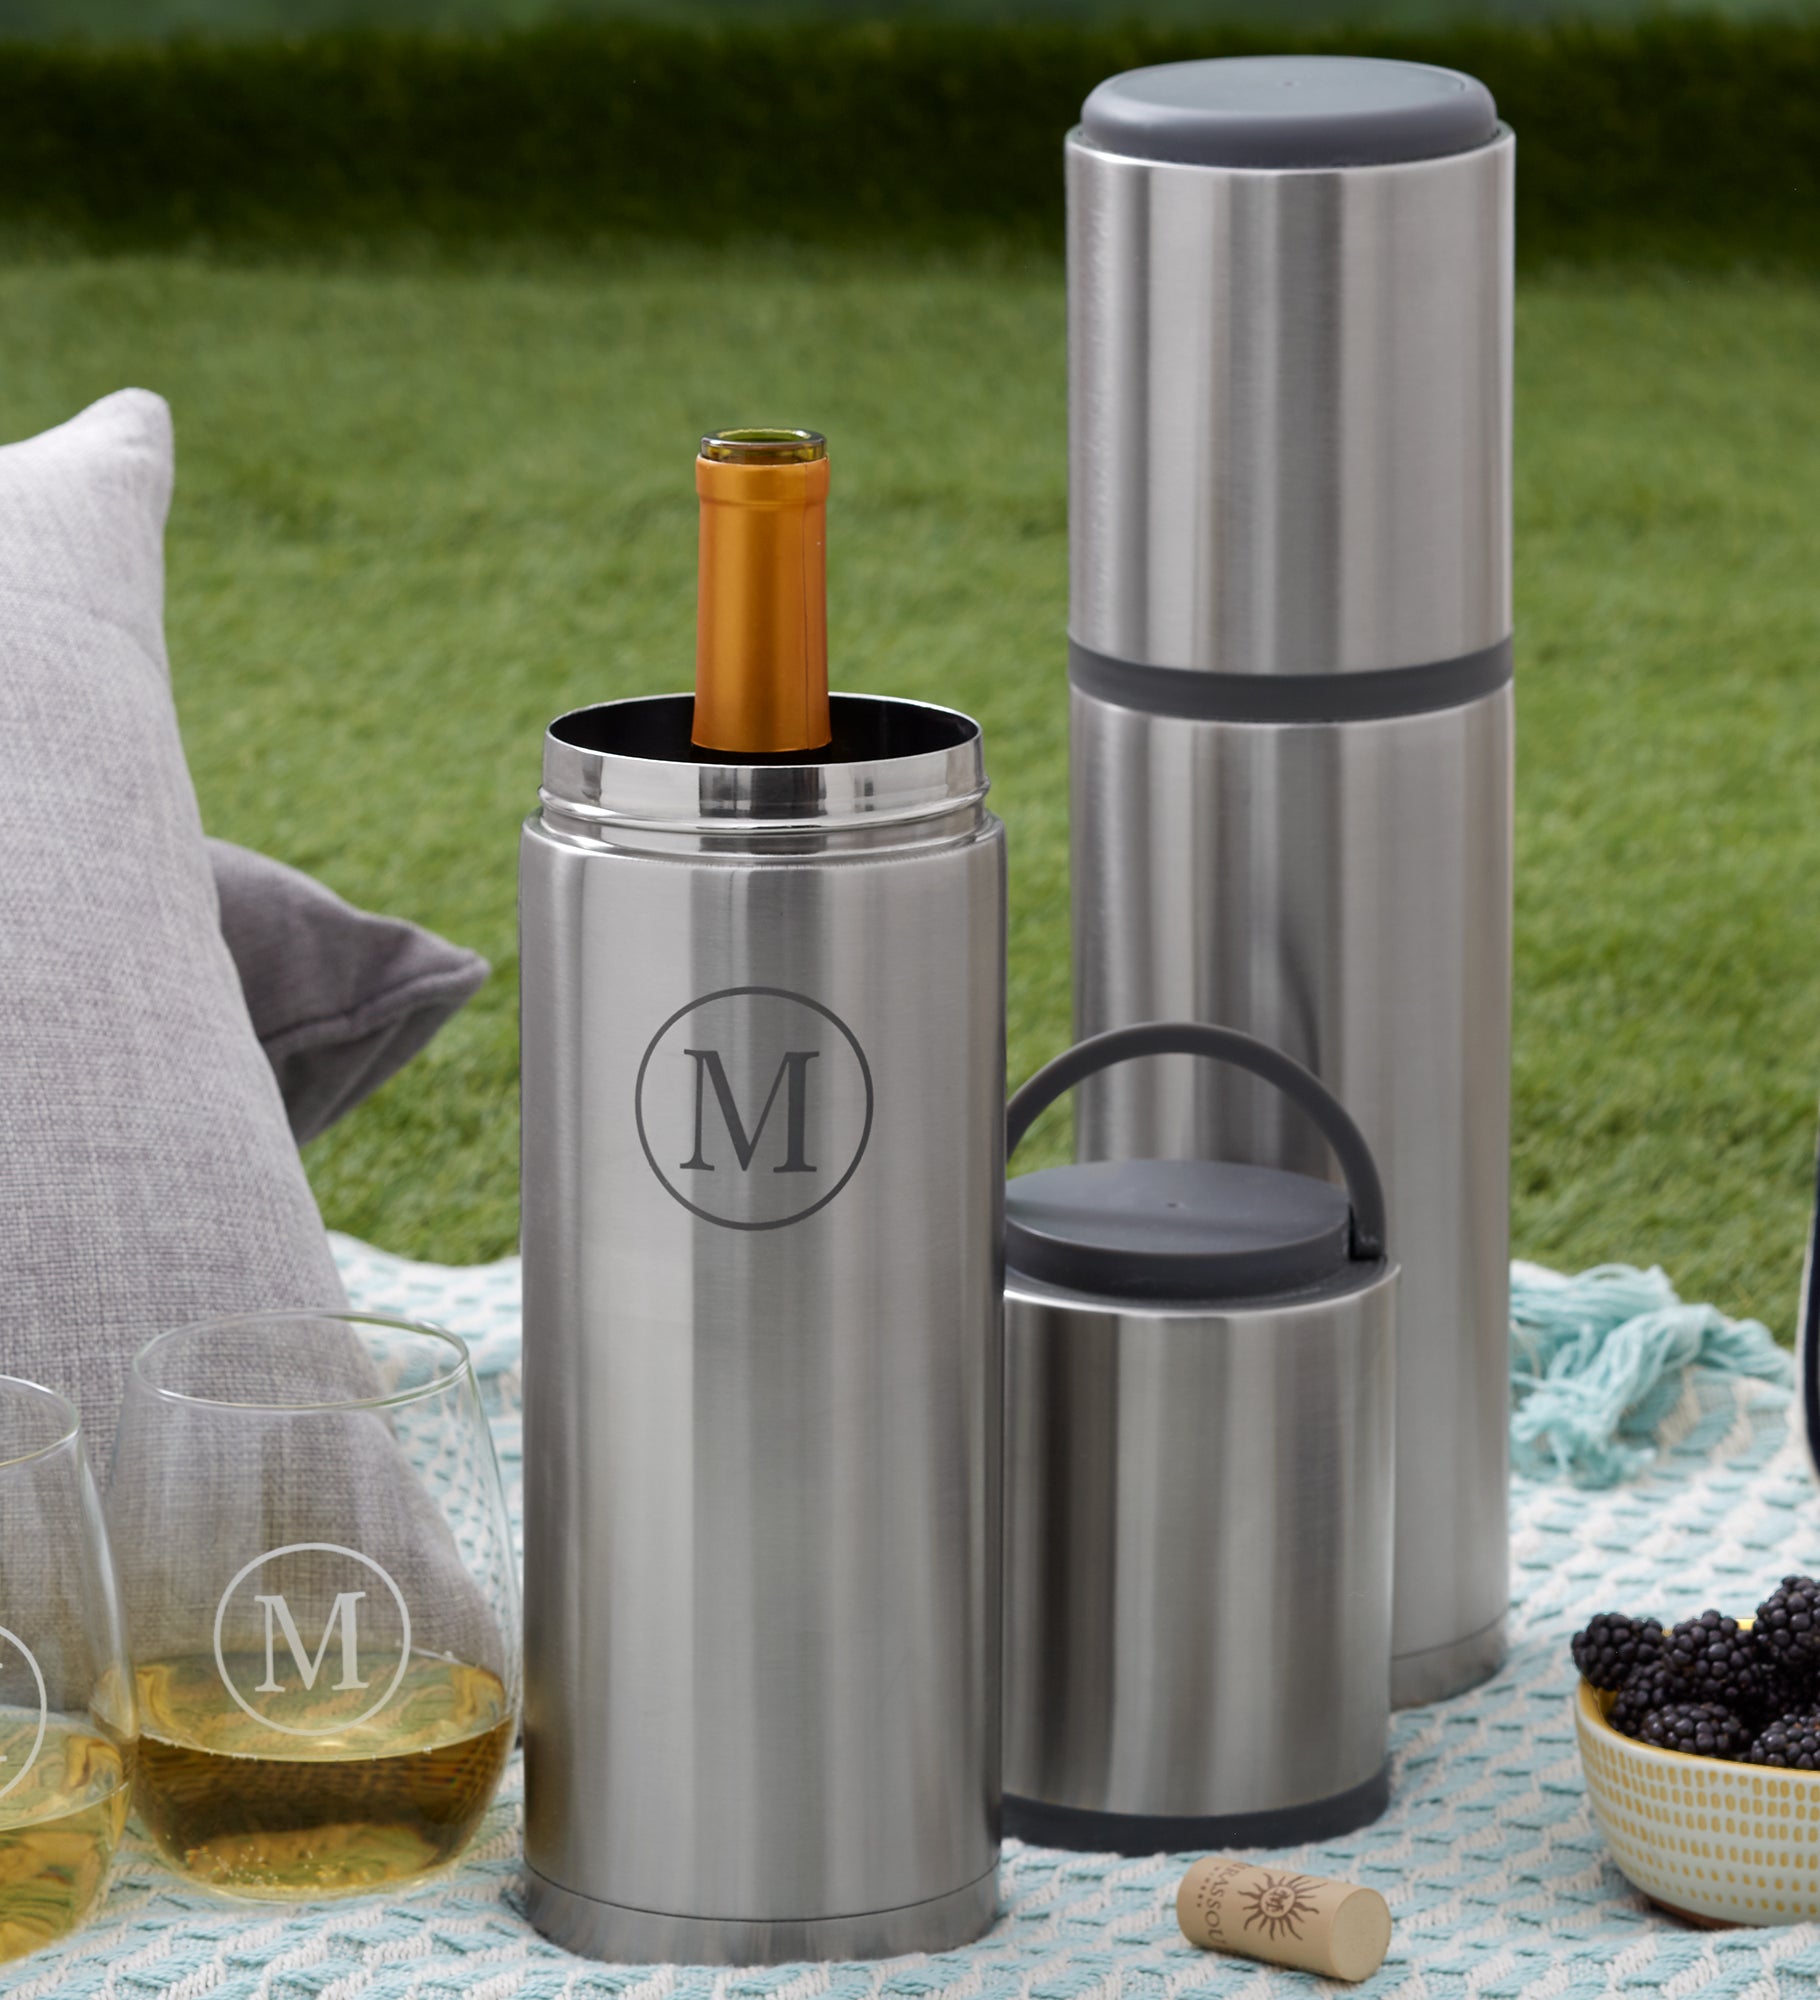 Personalized Portable Wine Bottle Chiller